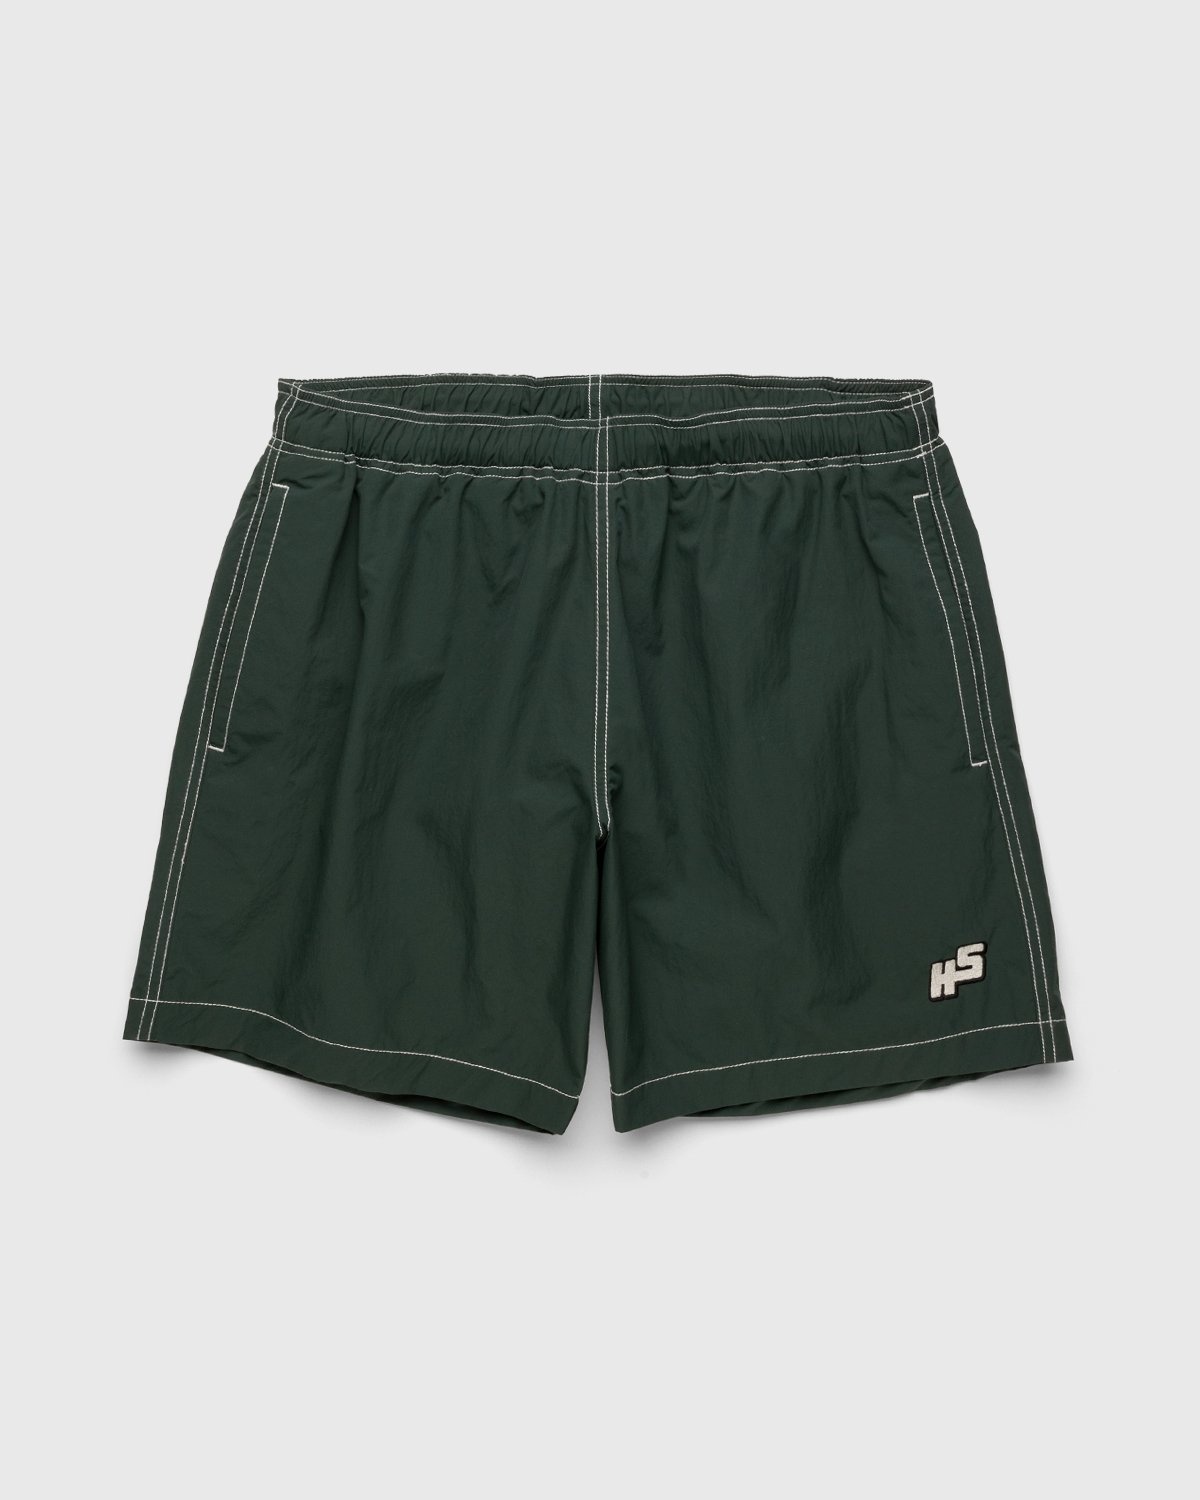 Highsnobiety – Contrast Brushed Nylon Water Shorts Green - Active Shorts - Green - Image 1